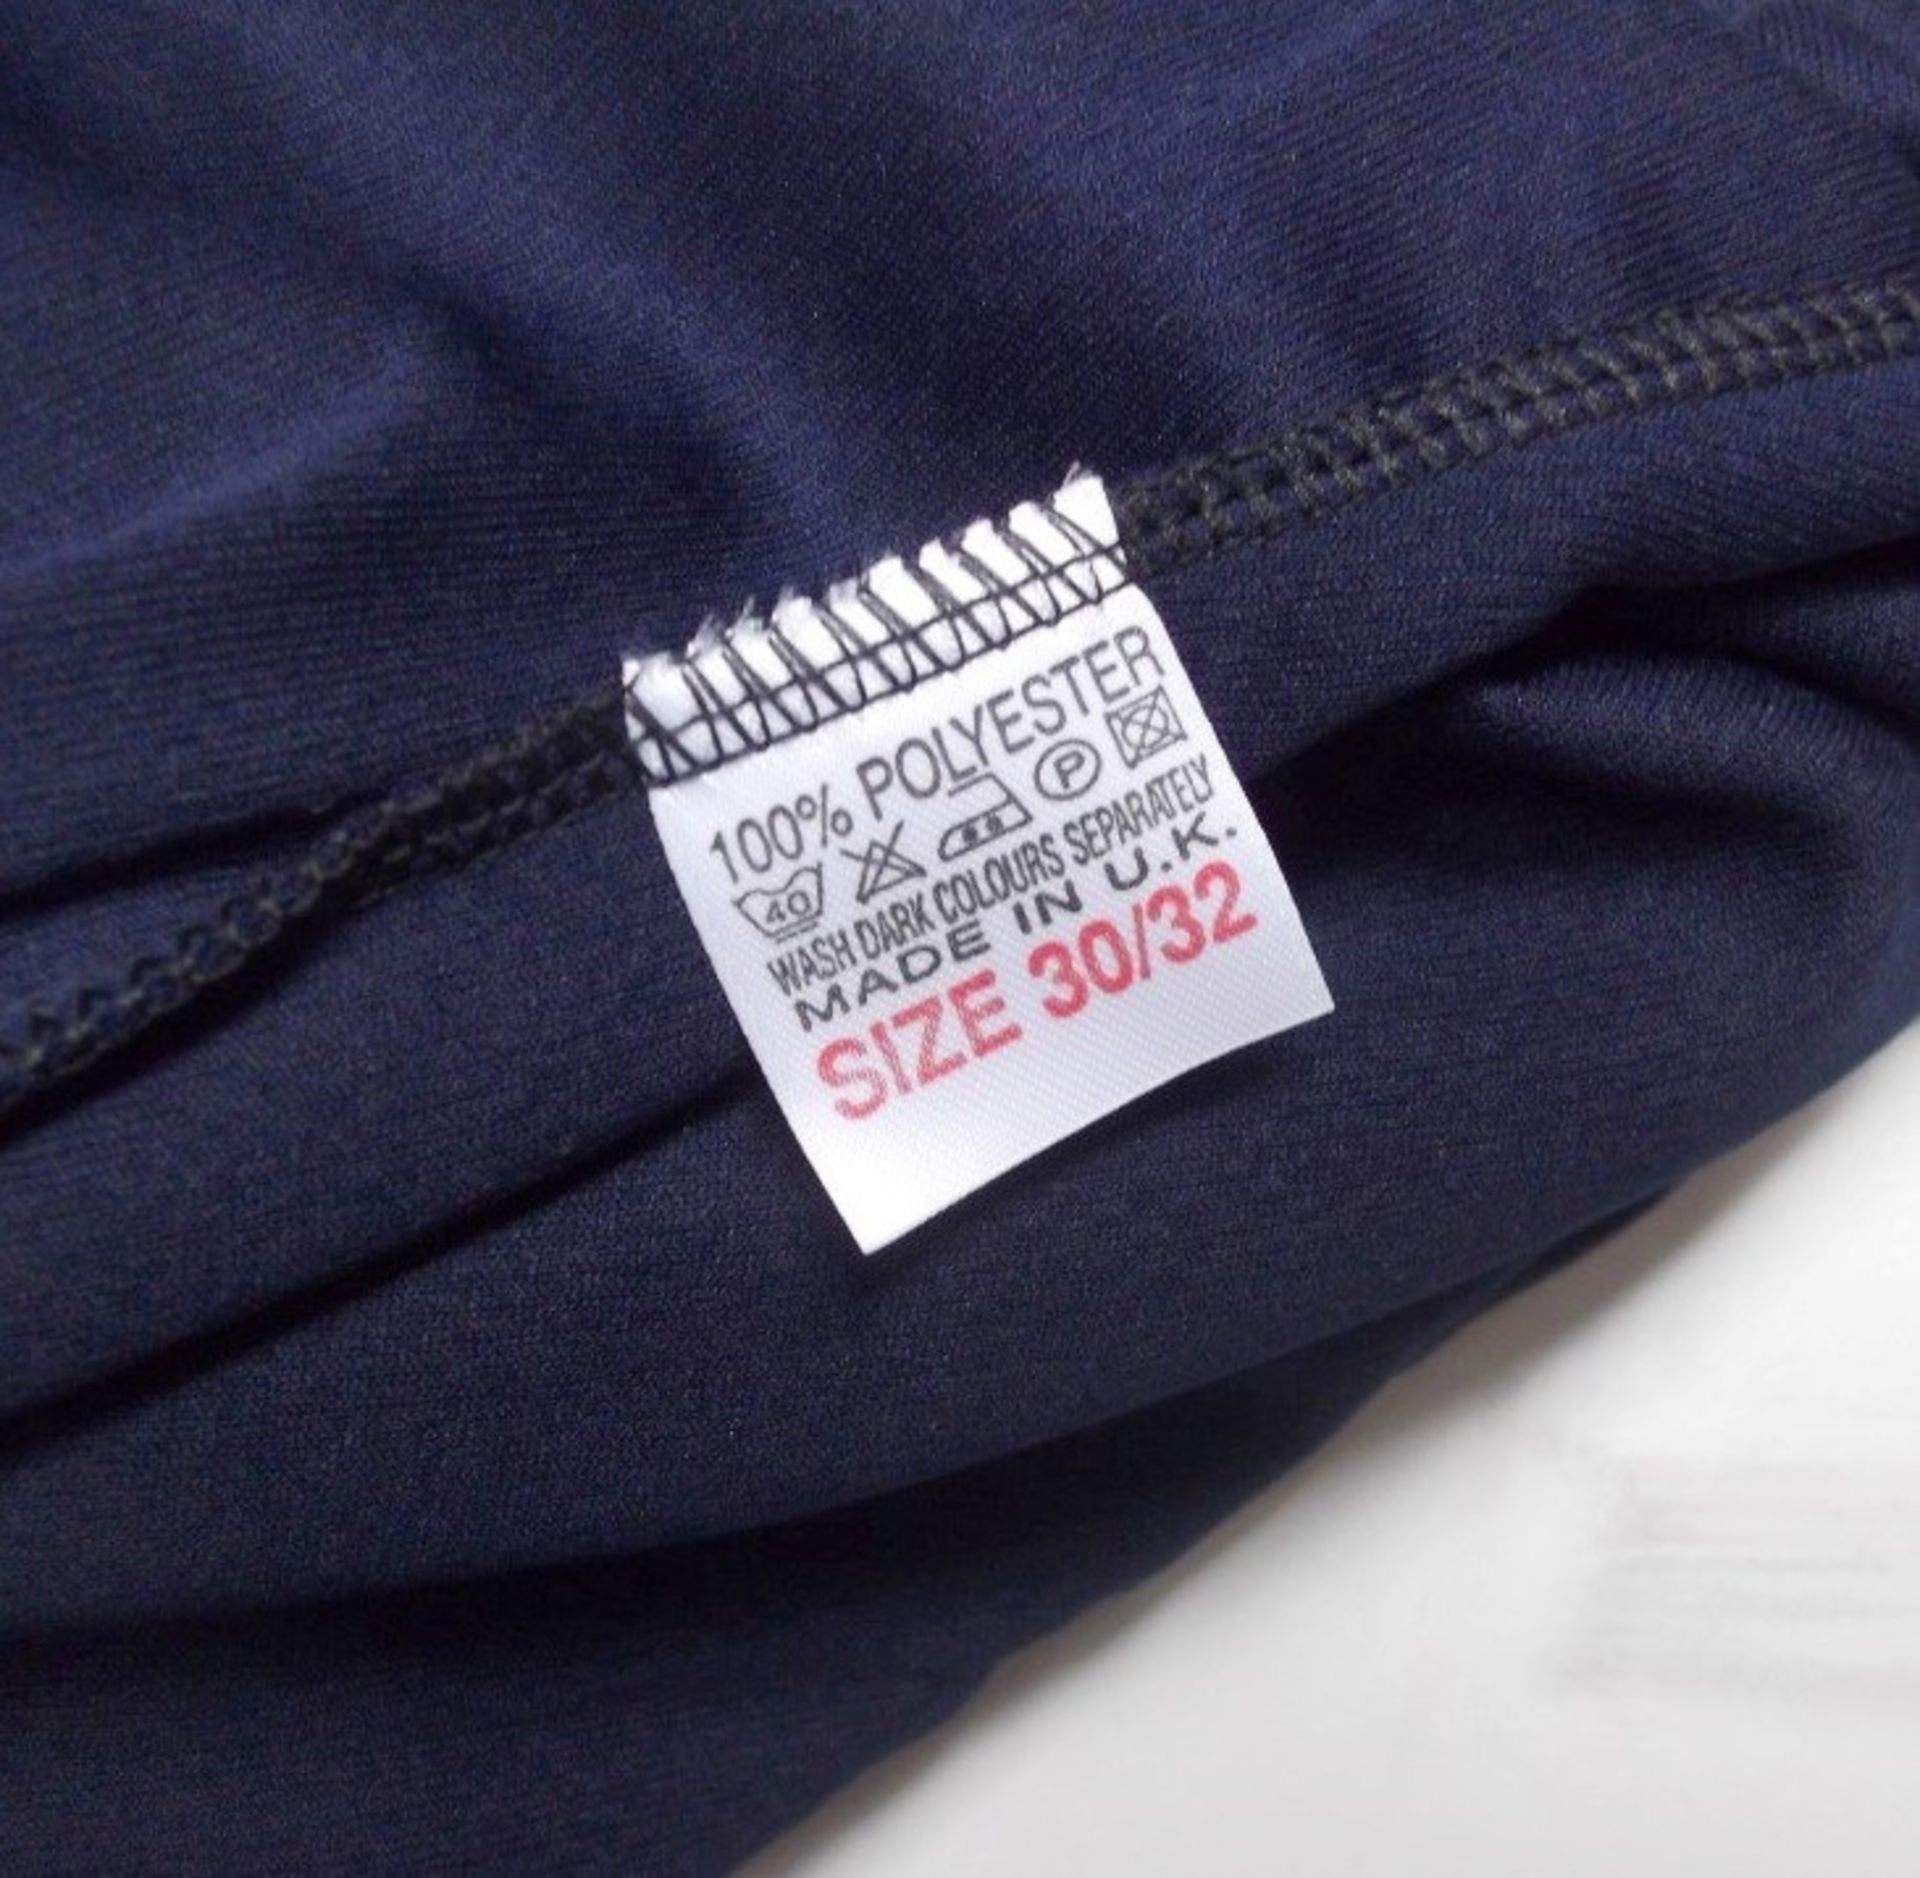 40 x Pairs Of Navy Blue Shorts - British Made - Sizes: 30 - 38 UK - New & Bagged - CL155 - Ref: - Image 3 of 3